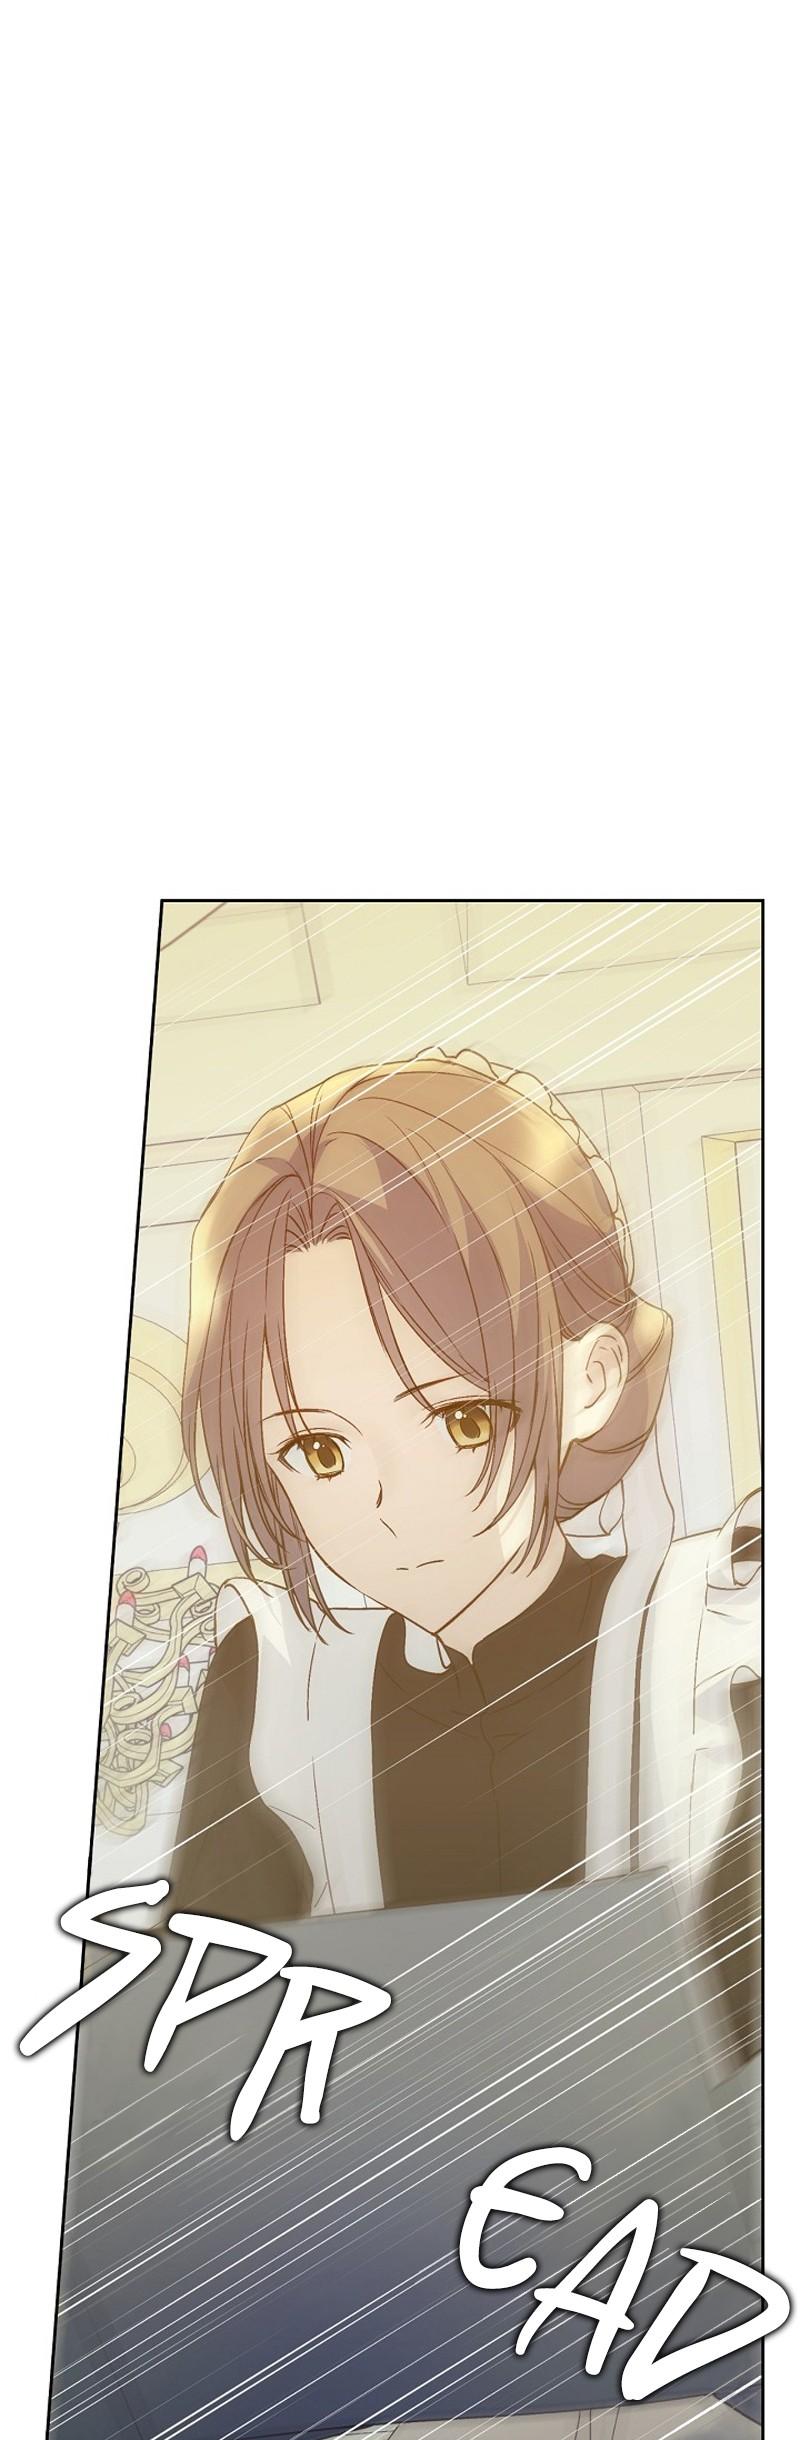 A Capable Maid chapter 6